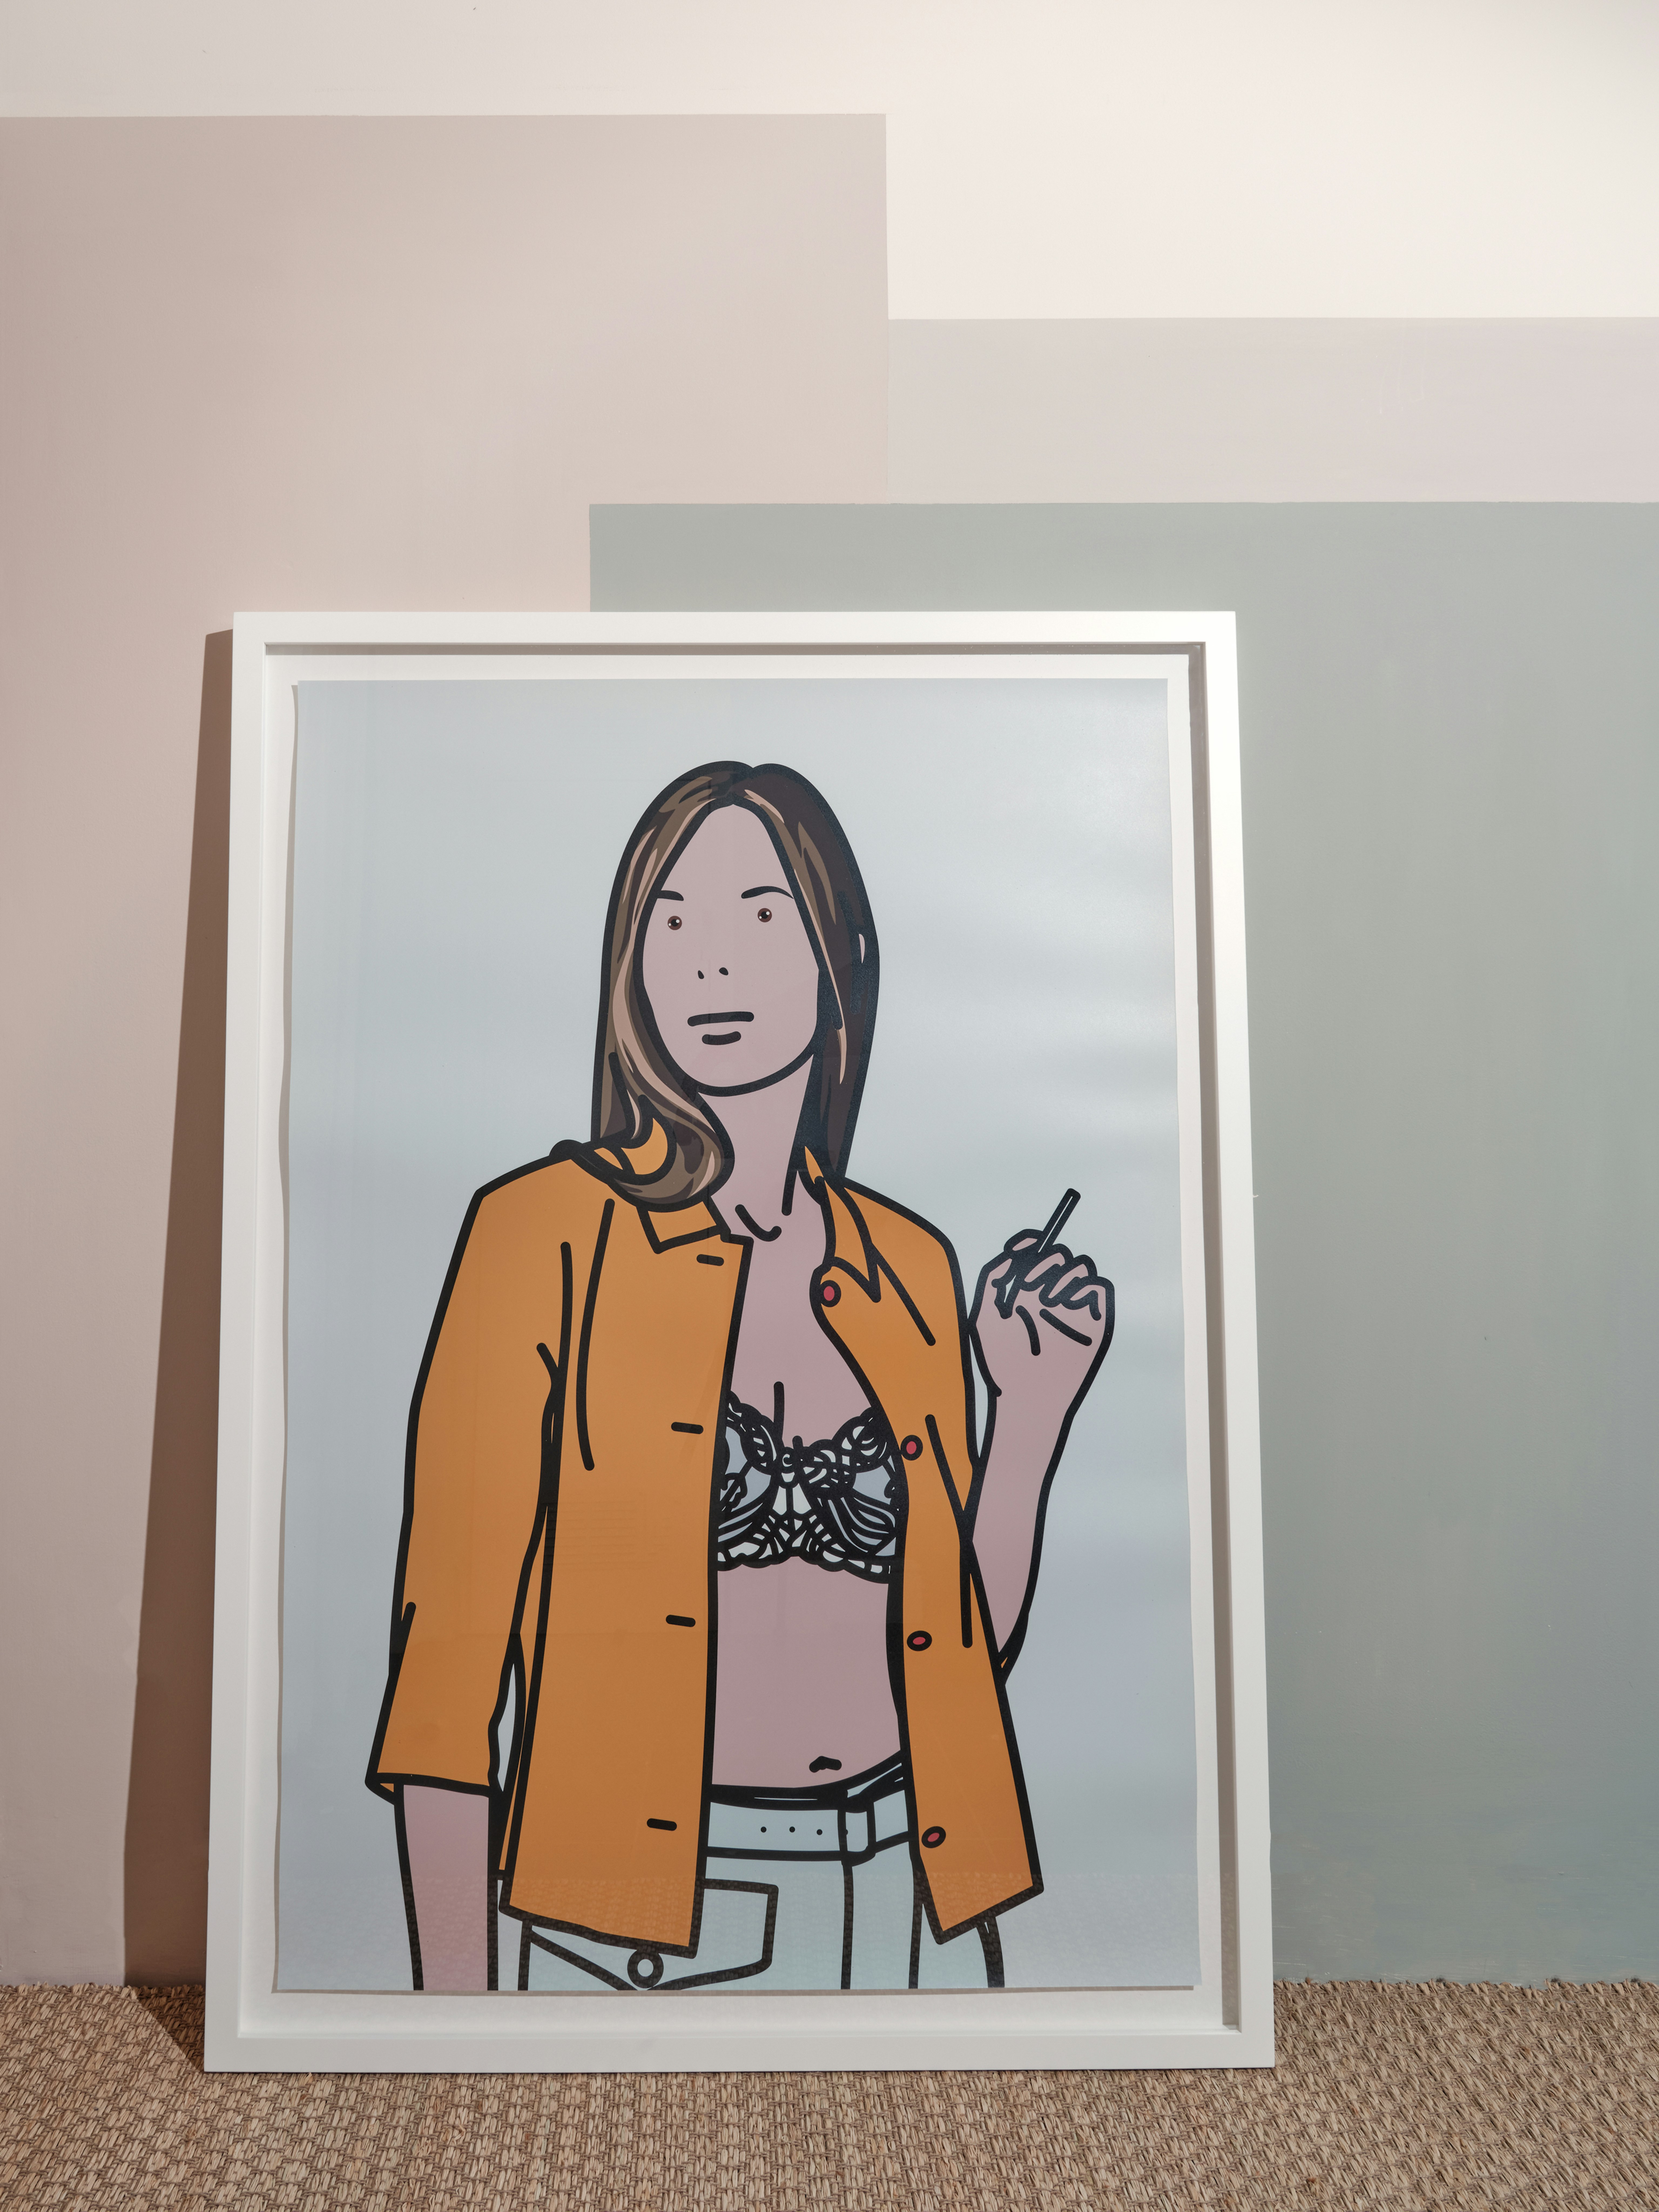 installation photograph of screenprint by Julian Opie depicting woman with orange open button down and visible lace bra smoking